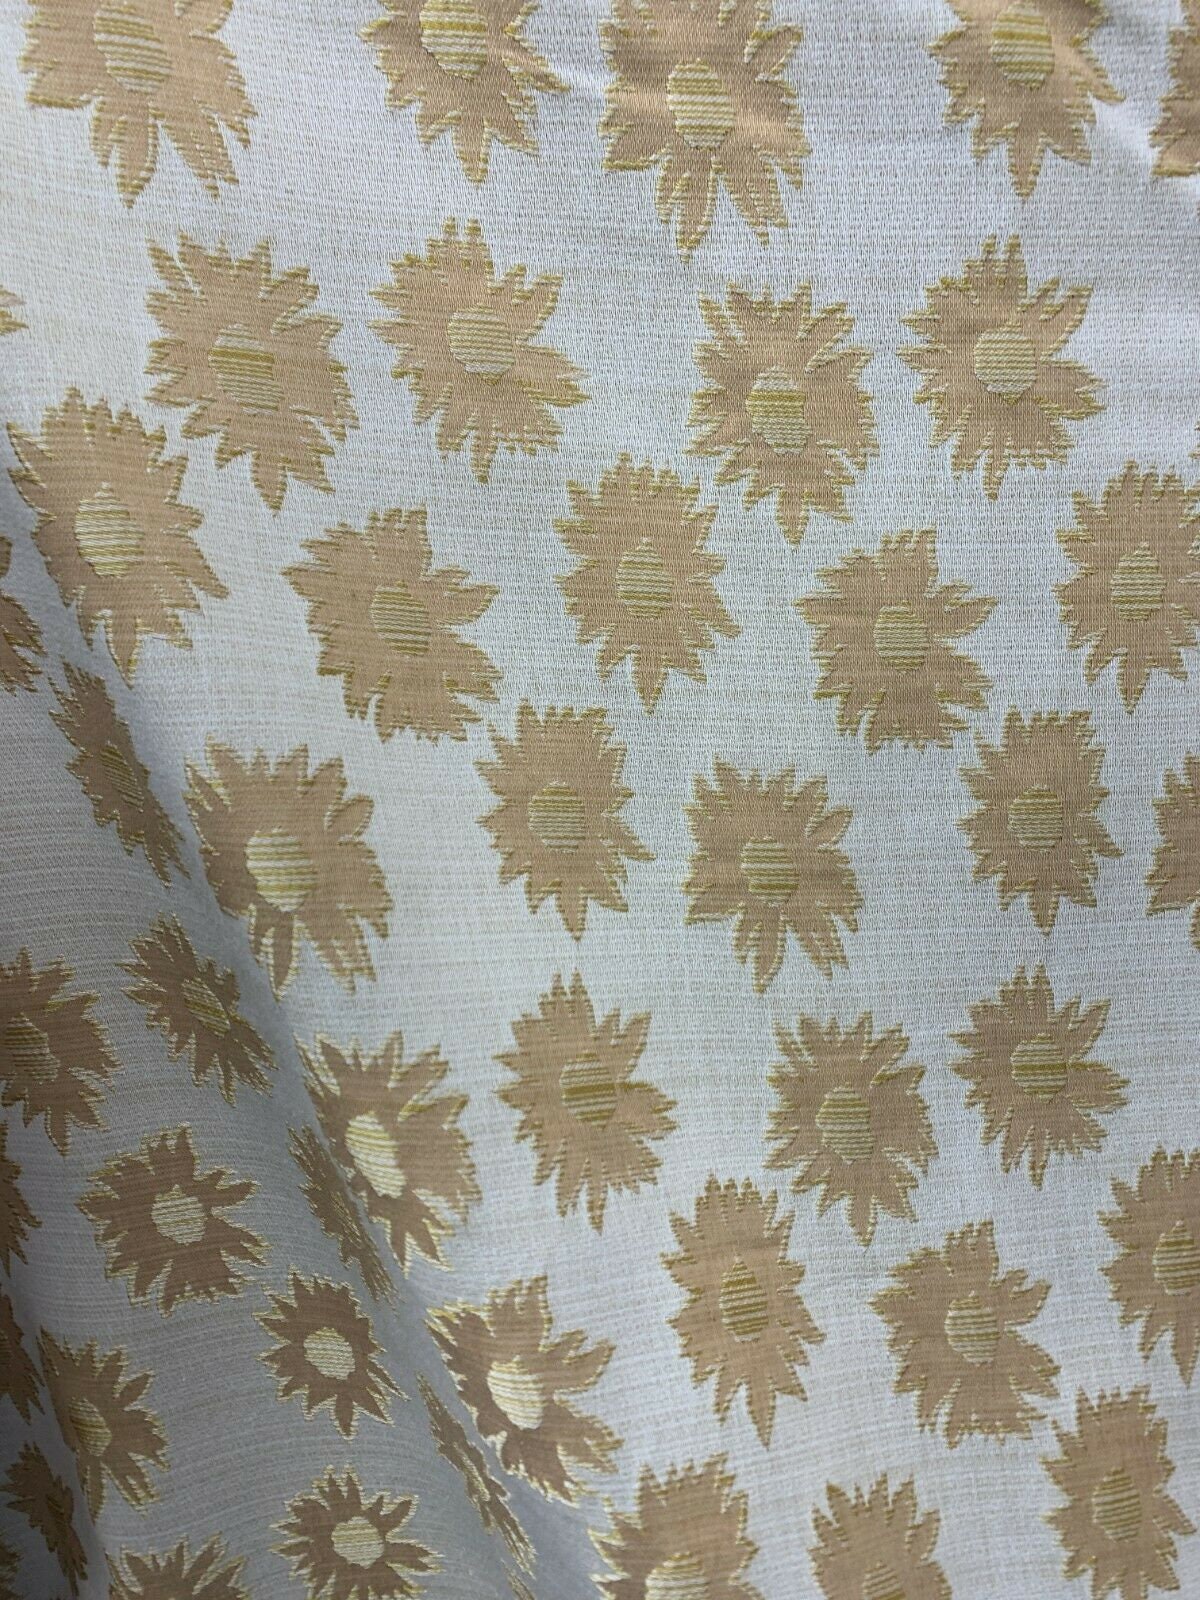 BEIGE TAN Sunflower Floral Brocade Upholstery Drapery Fabric (54 in.) Sold By The Yard